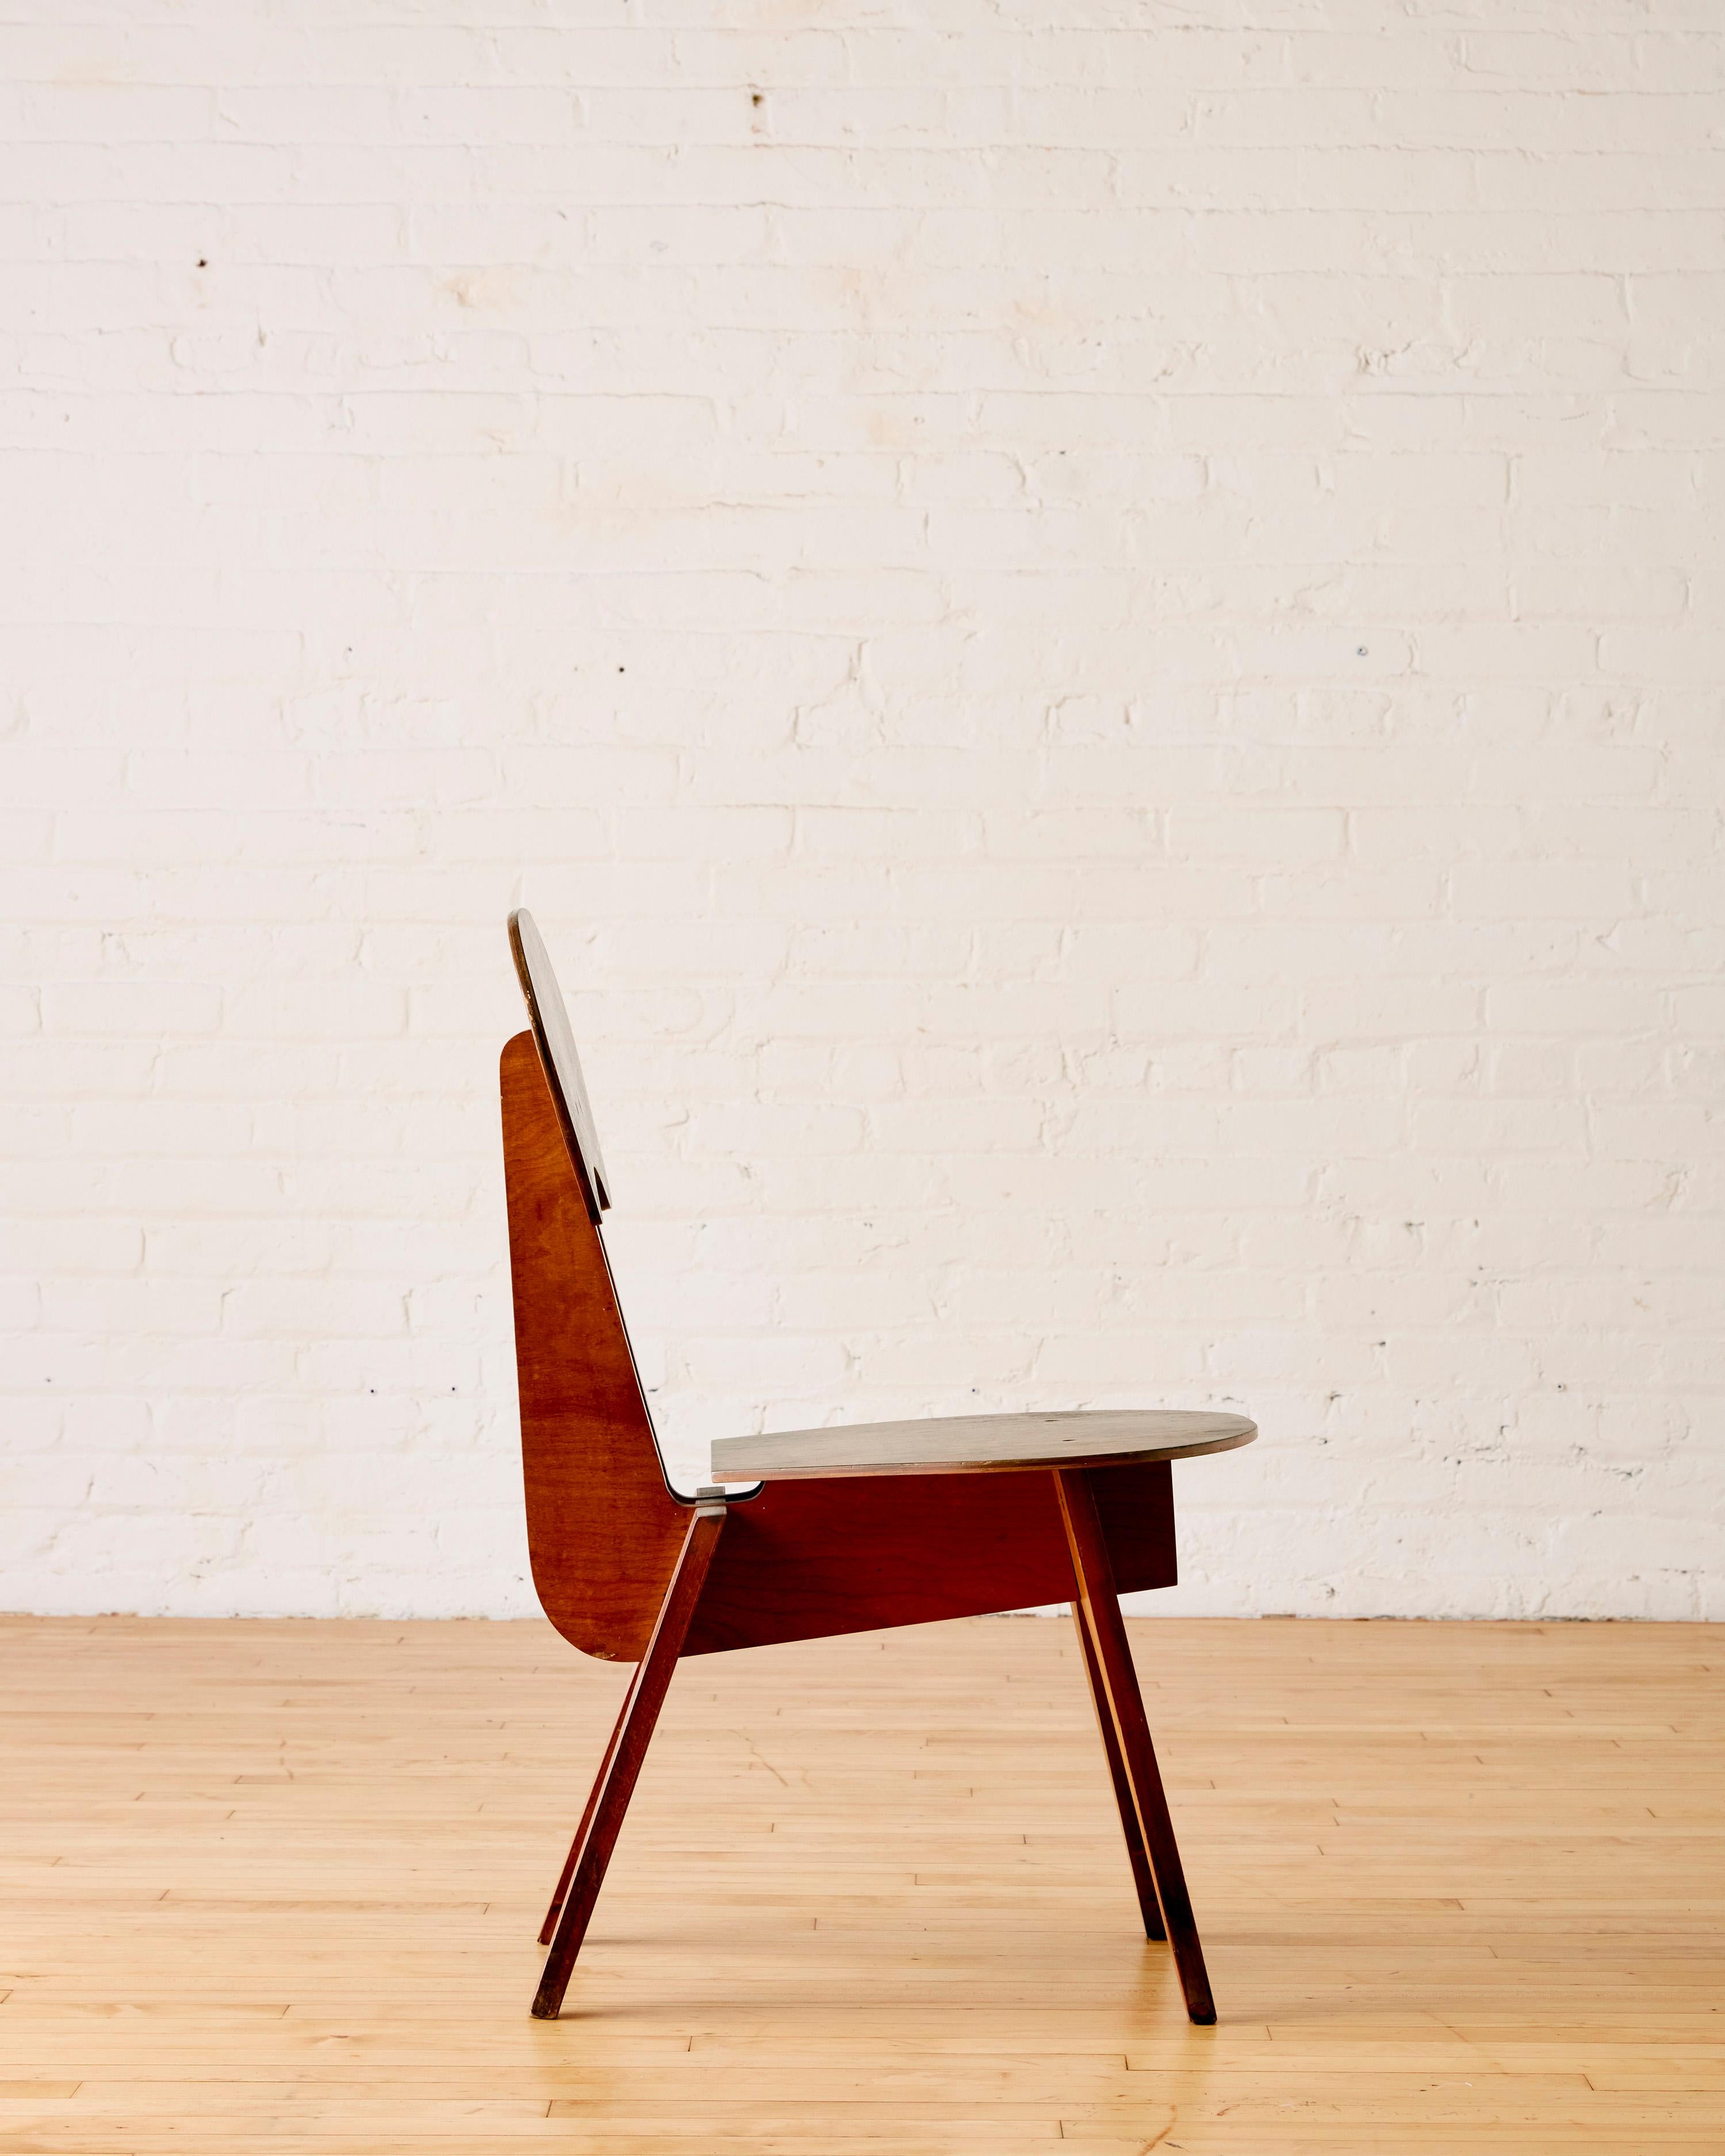 Rare plywood prototype chair circa 1960's designed by an unknown student from the Chicago school of design, the New Bauhaus, founded by Lazlo Moholy-Nagy in 1937. Design was influenced by Marcel Breuer and Noguchi.

Comes with book specifying